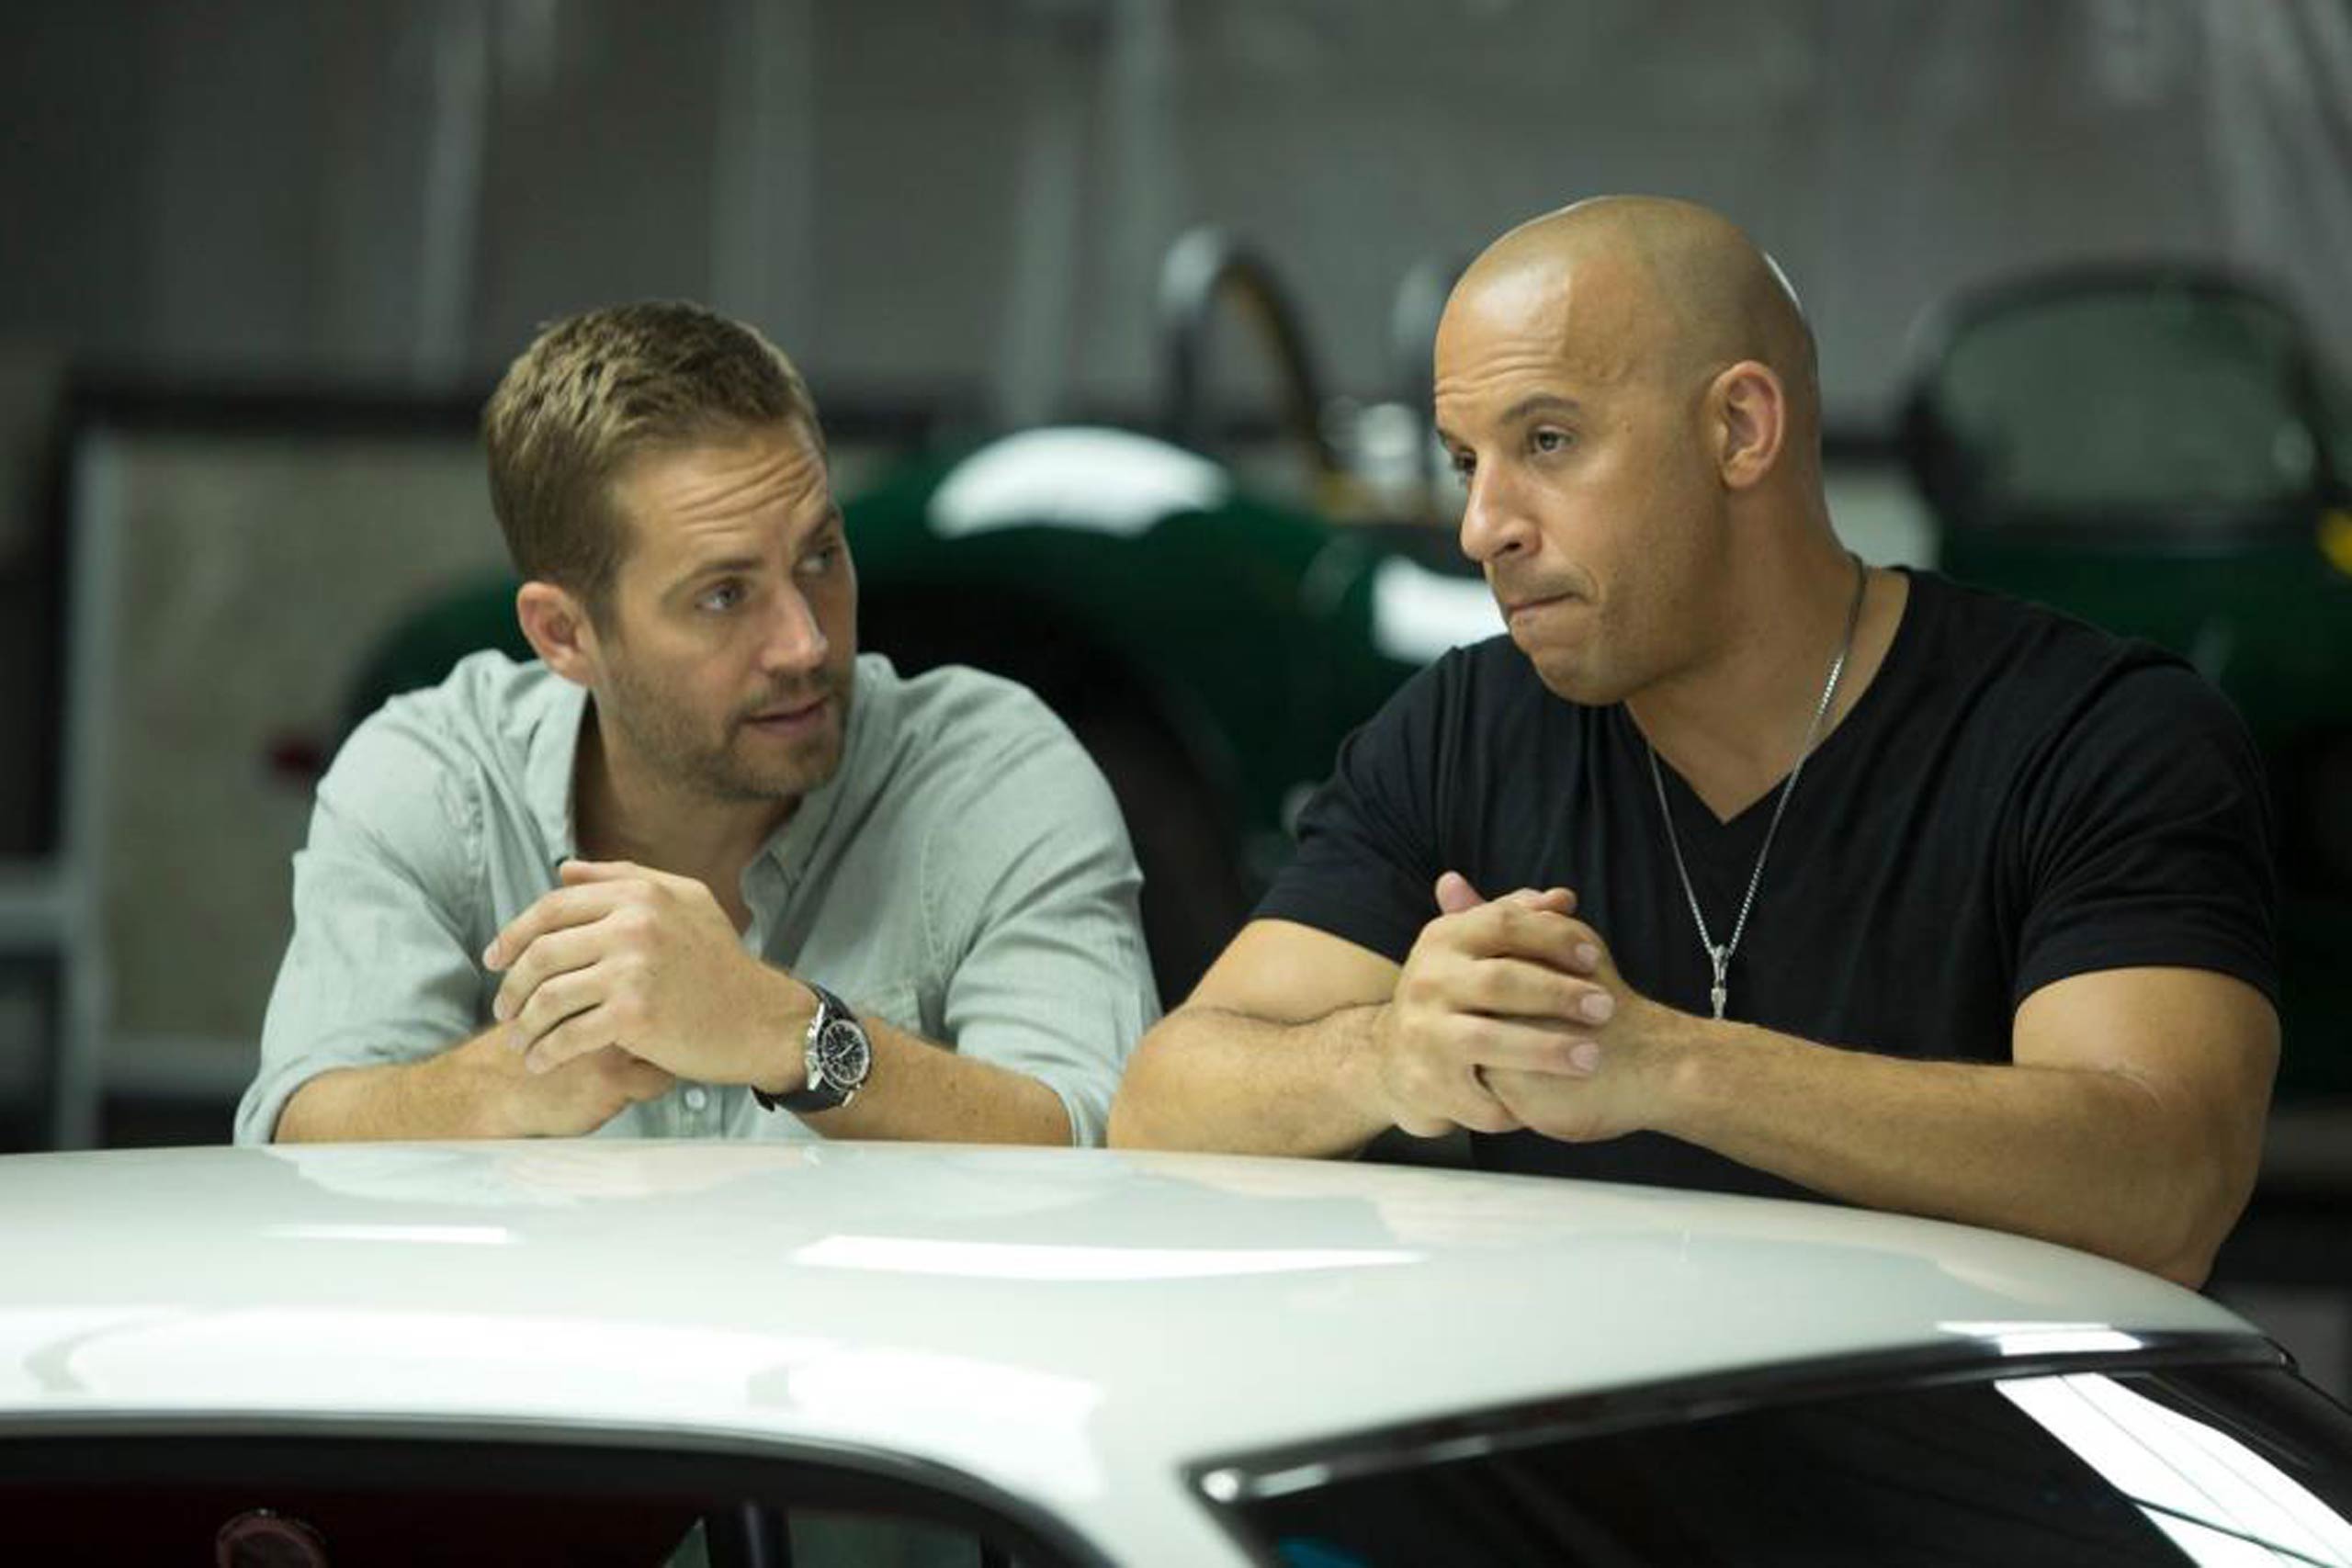 Brian O'Conner and Dominic Toretto in <i>The Fast and the Furious</i> (Universal)